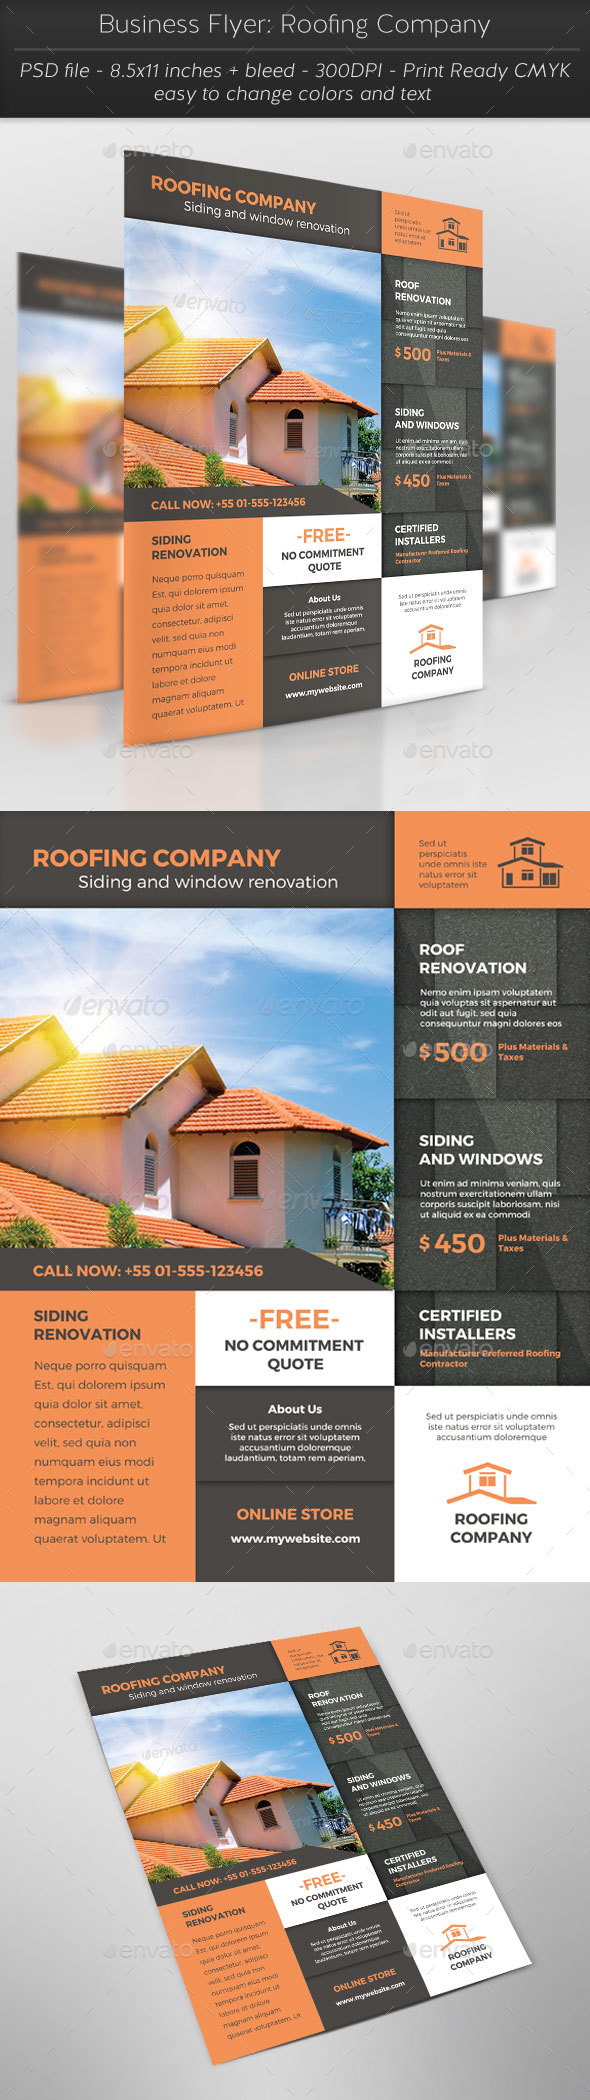 Business Flyer: Roofing Company